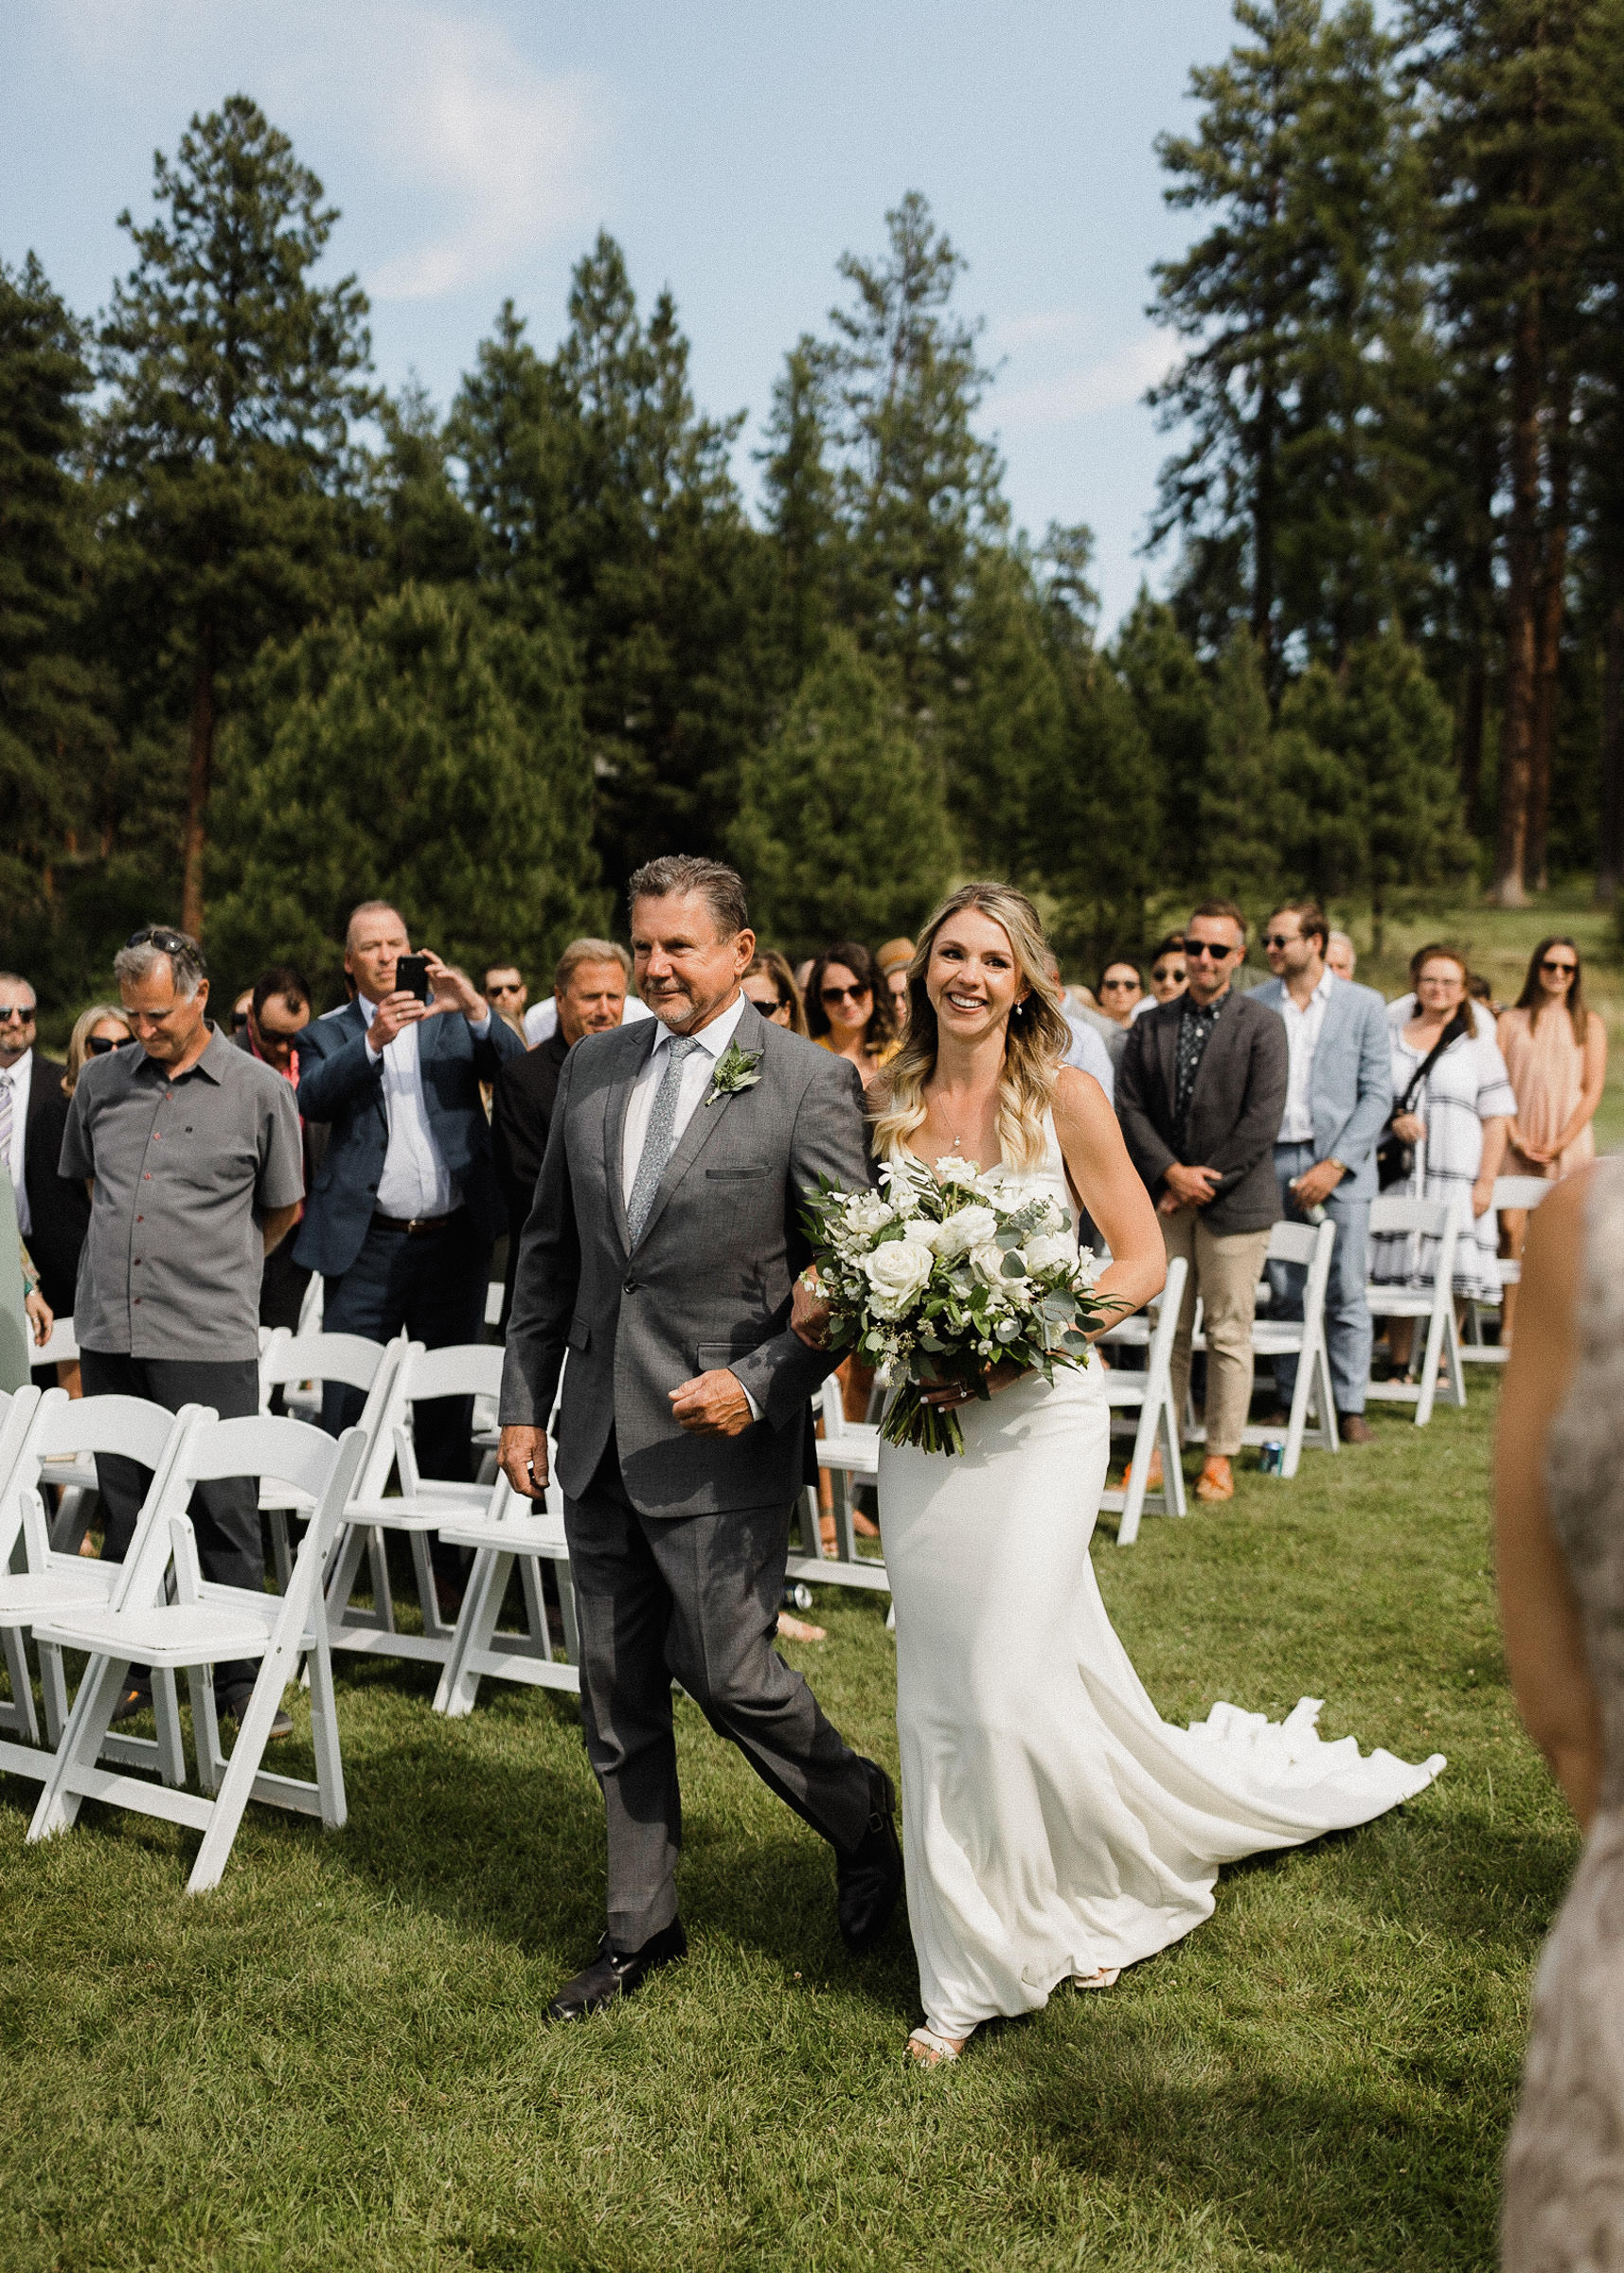 Bride's father walks her down the aisle in a grassy field